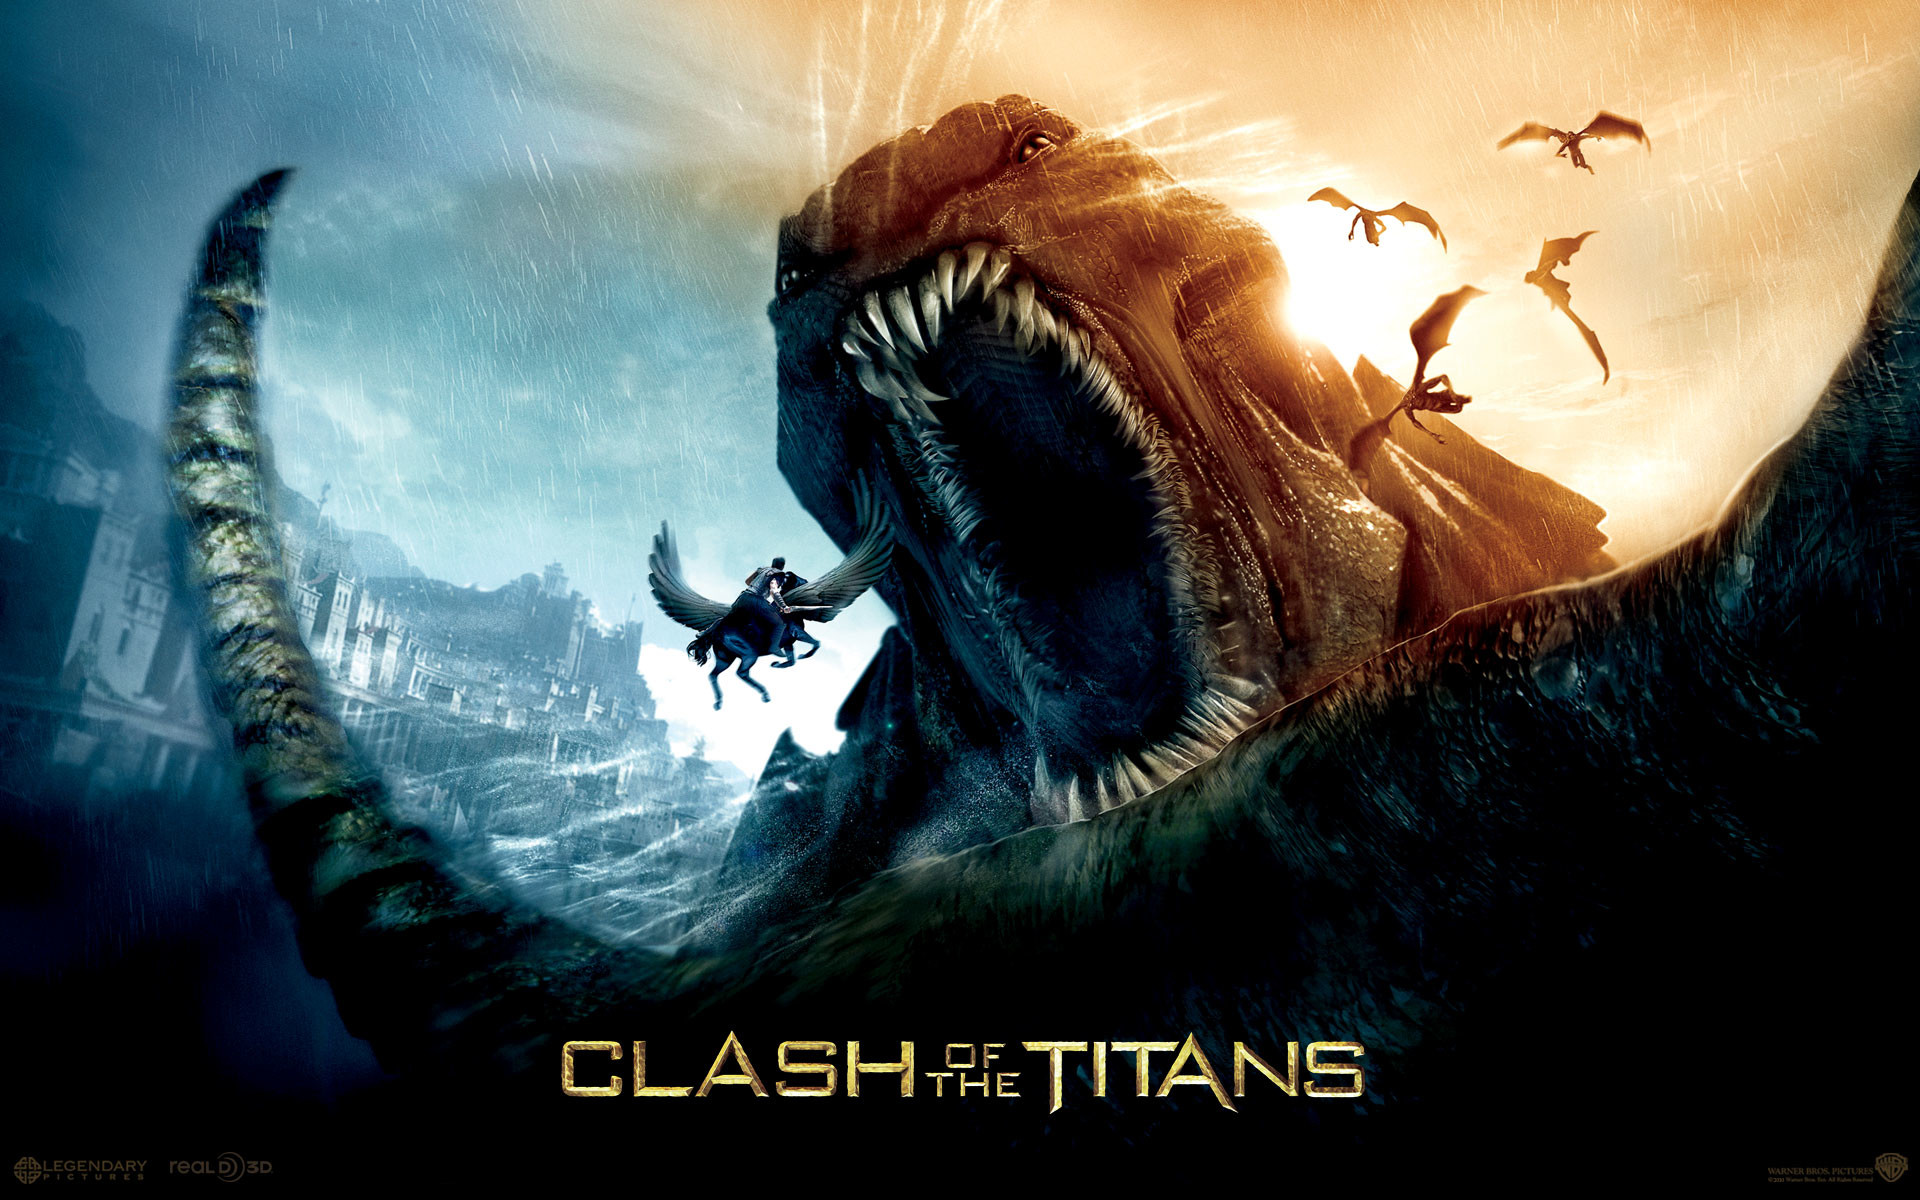 1920x1200 Bild: Clash of the Titans - wÃ¼tend Monster wallpapers and stock photos. Â«